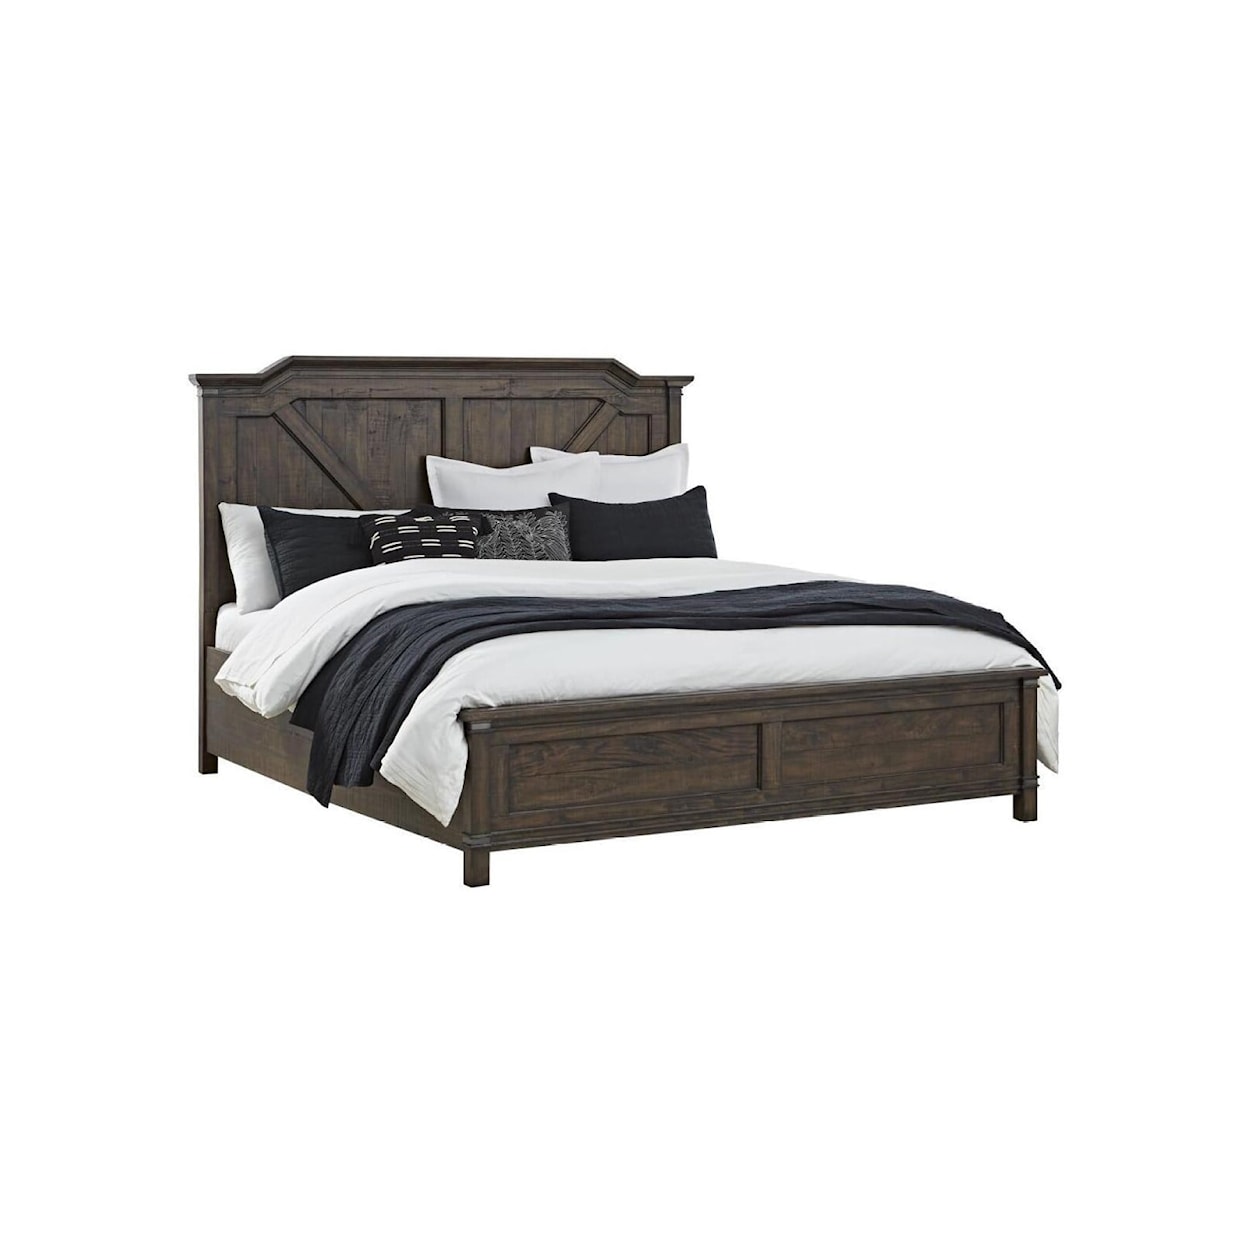 American Woodcrafters Farmwood Queen Panel Bed